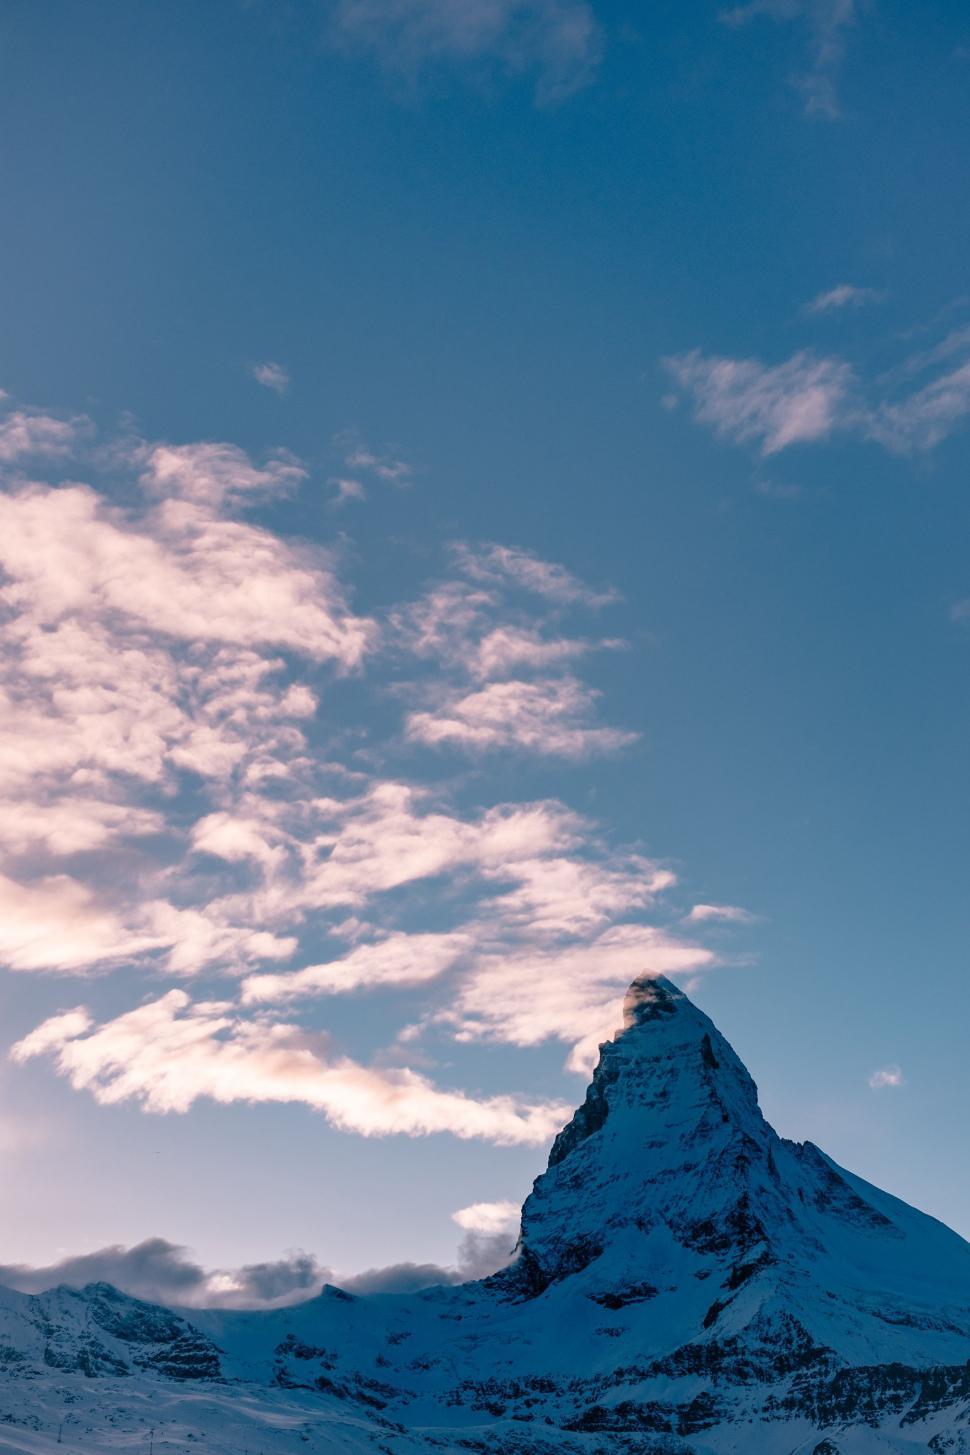 Free Image of Snow Covered Mountain Under Cloudy Blue Sky 